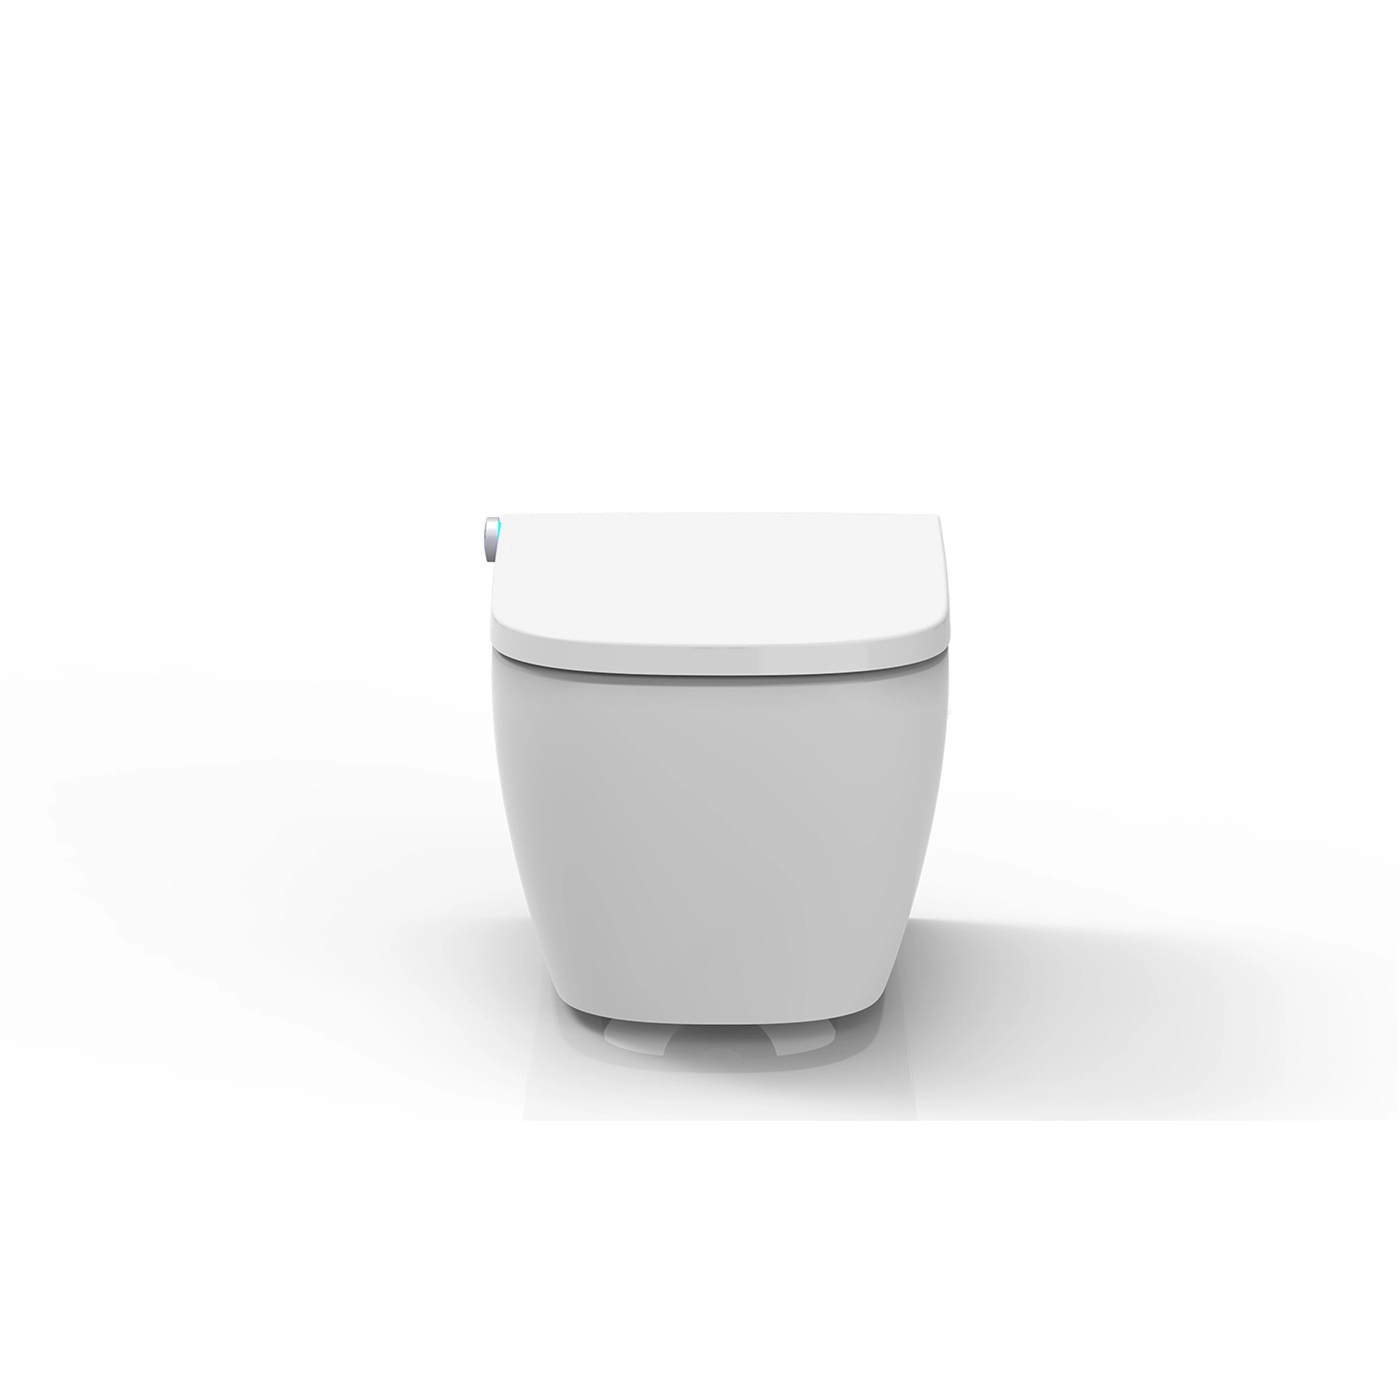 Smart toilets that value personal health and personal care